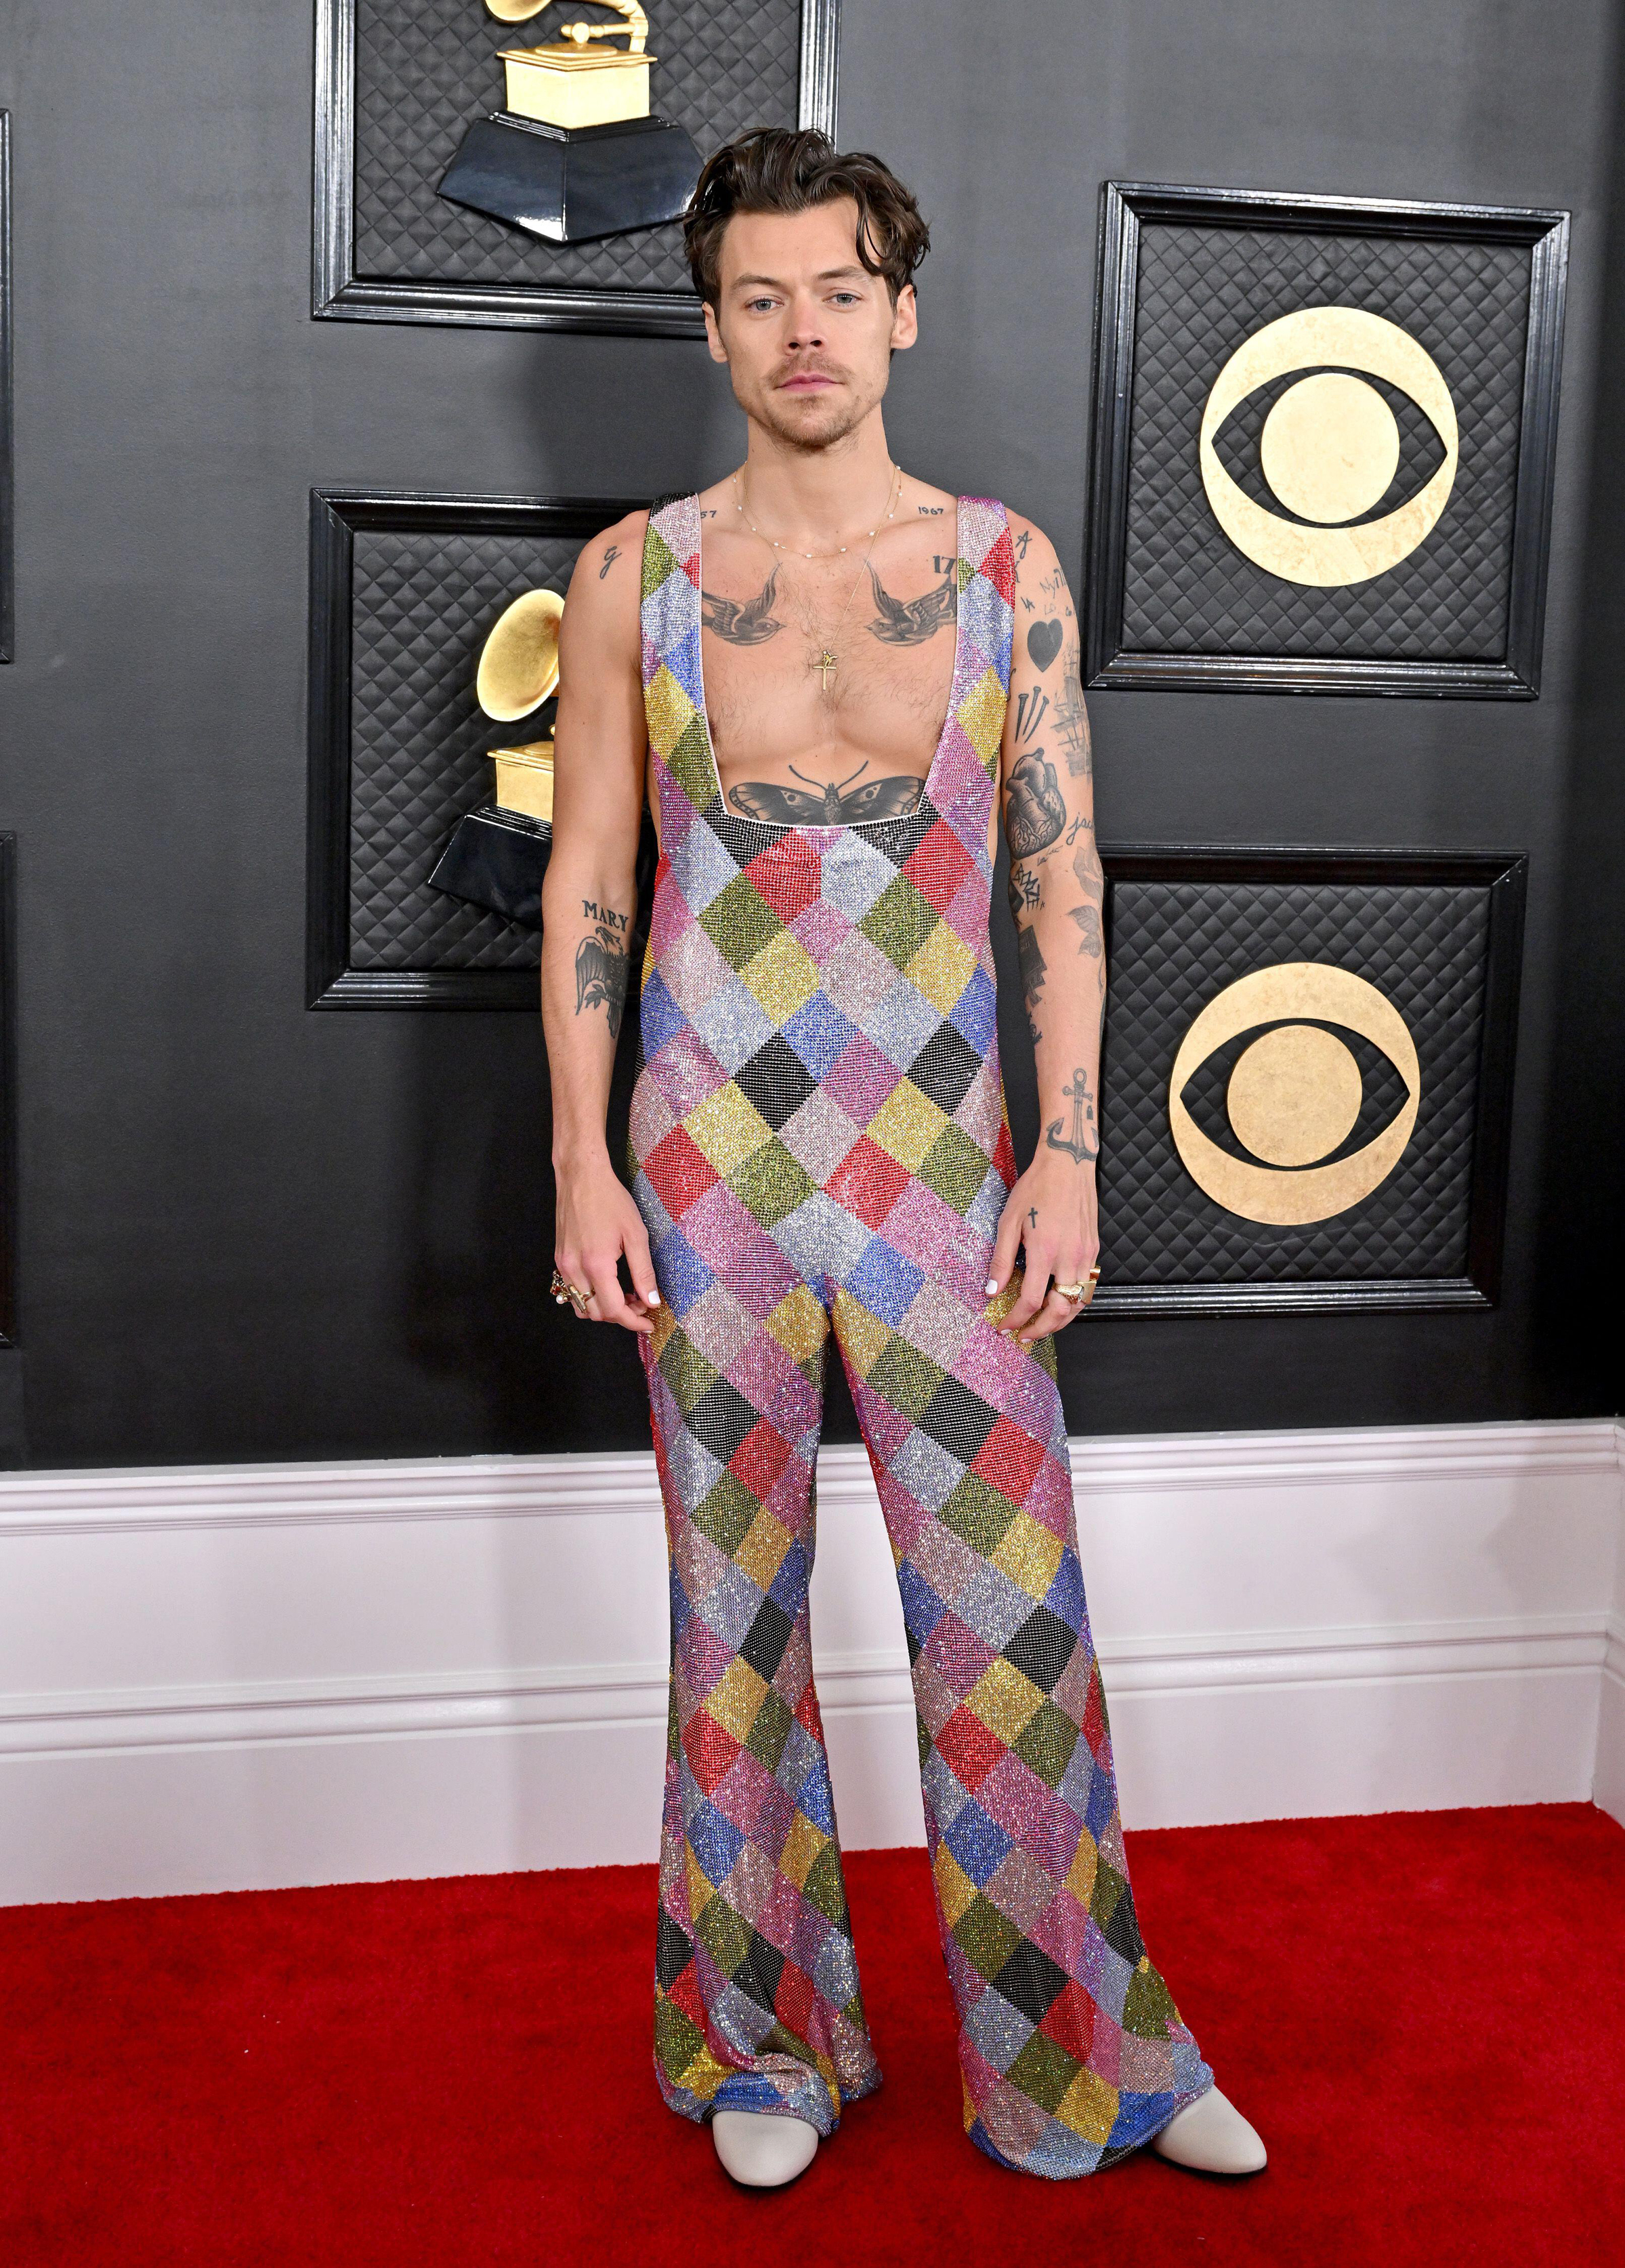 Harry Styles at the Grammys 